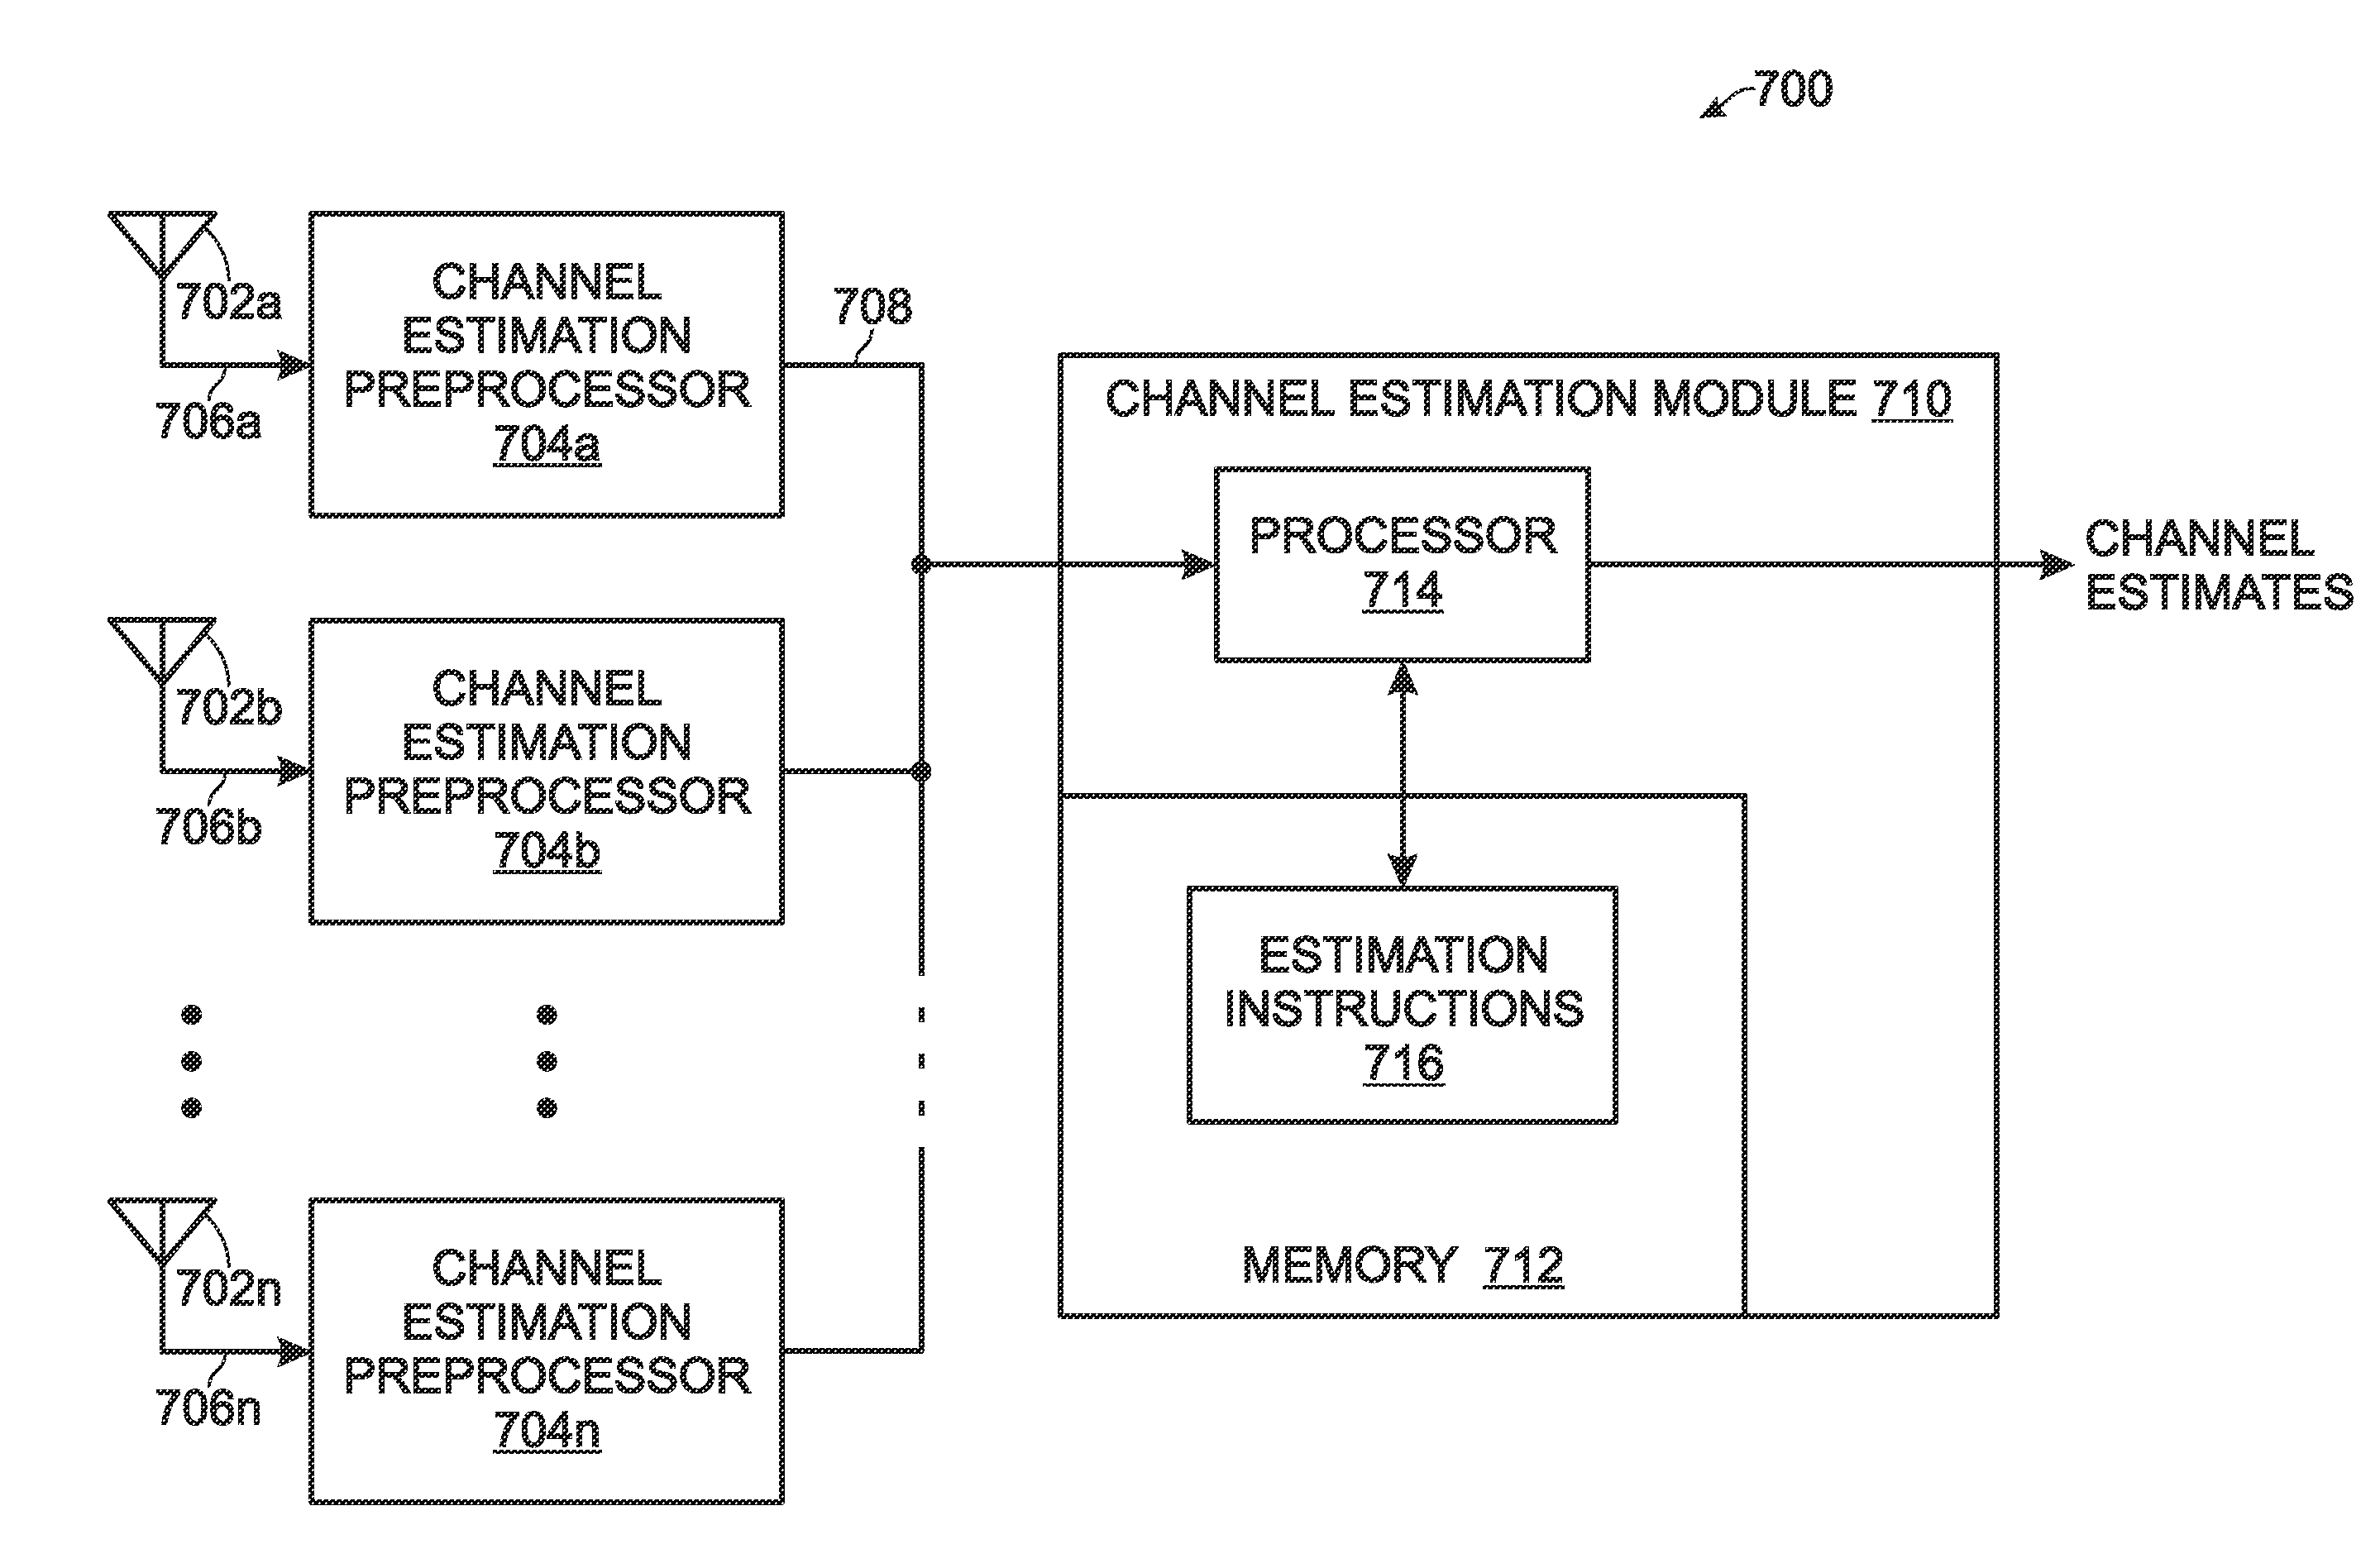 Multiuser multiple-input multiple-output (MU-MIMO) channel estimation for multicarrier communications